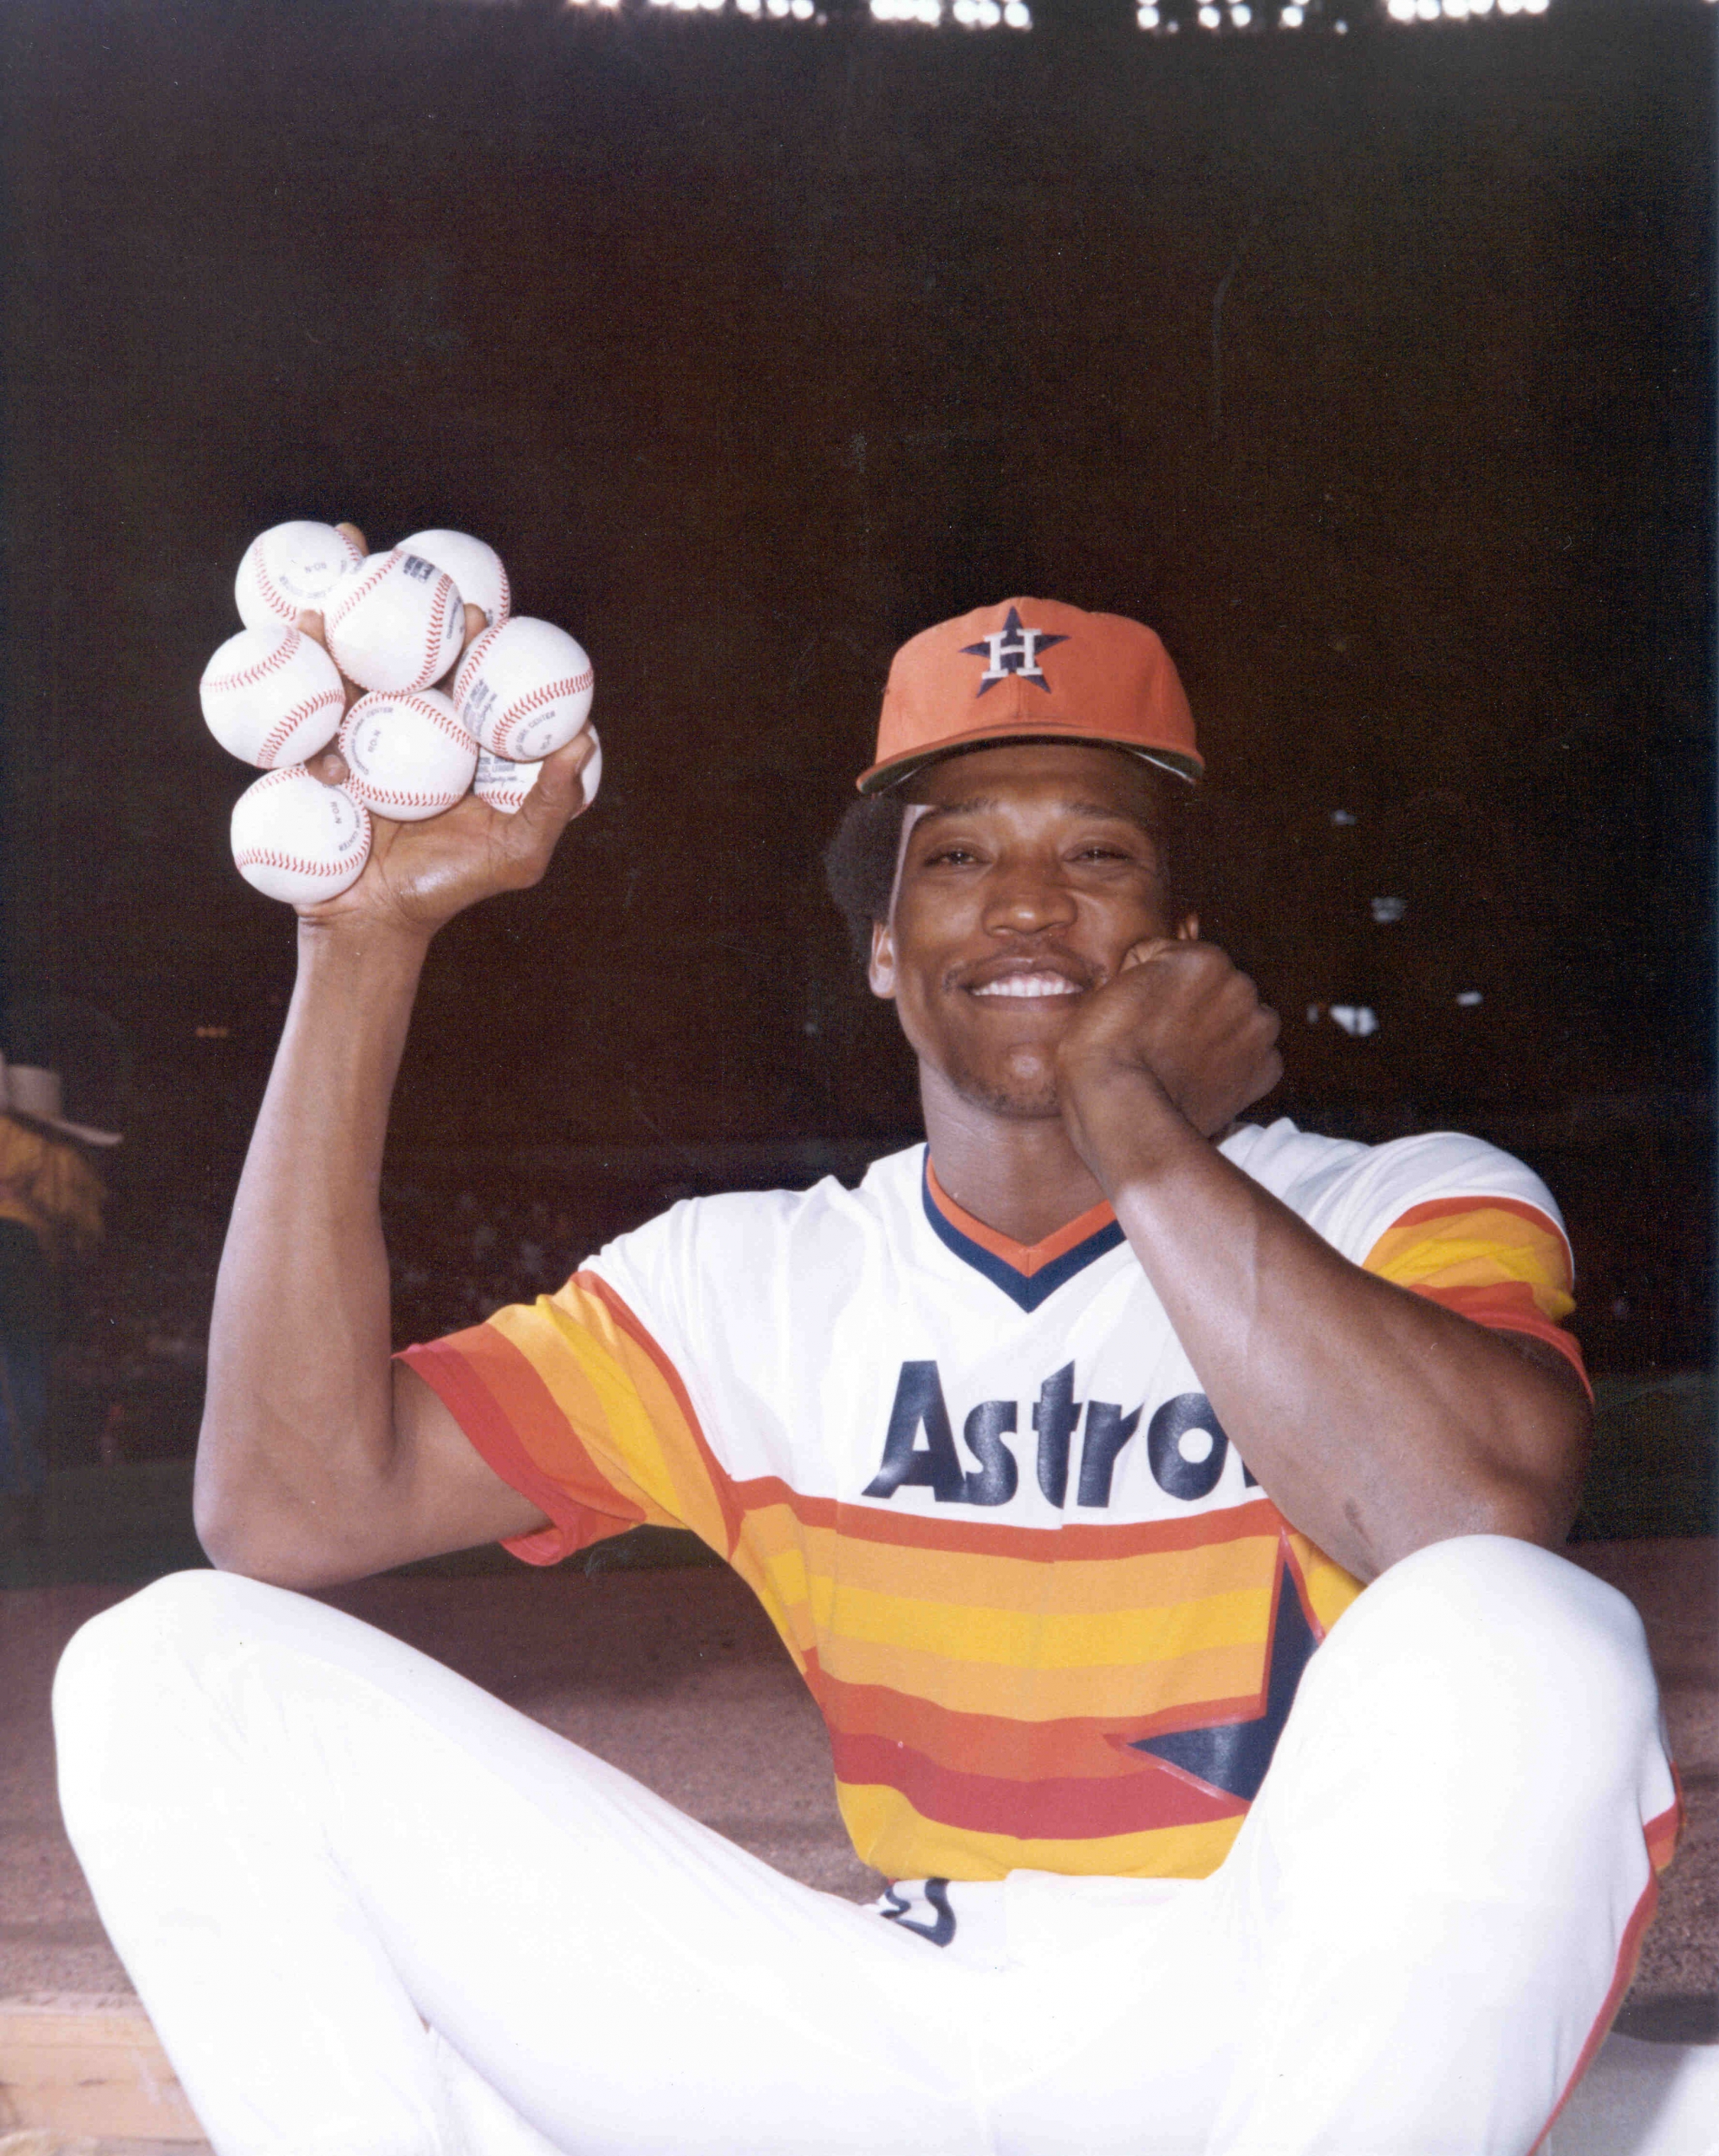 At the peak of his career, holding eight baseballs with his enormous pitching hand.